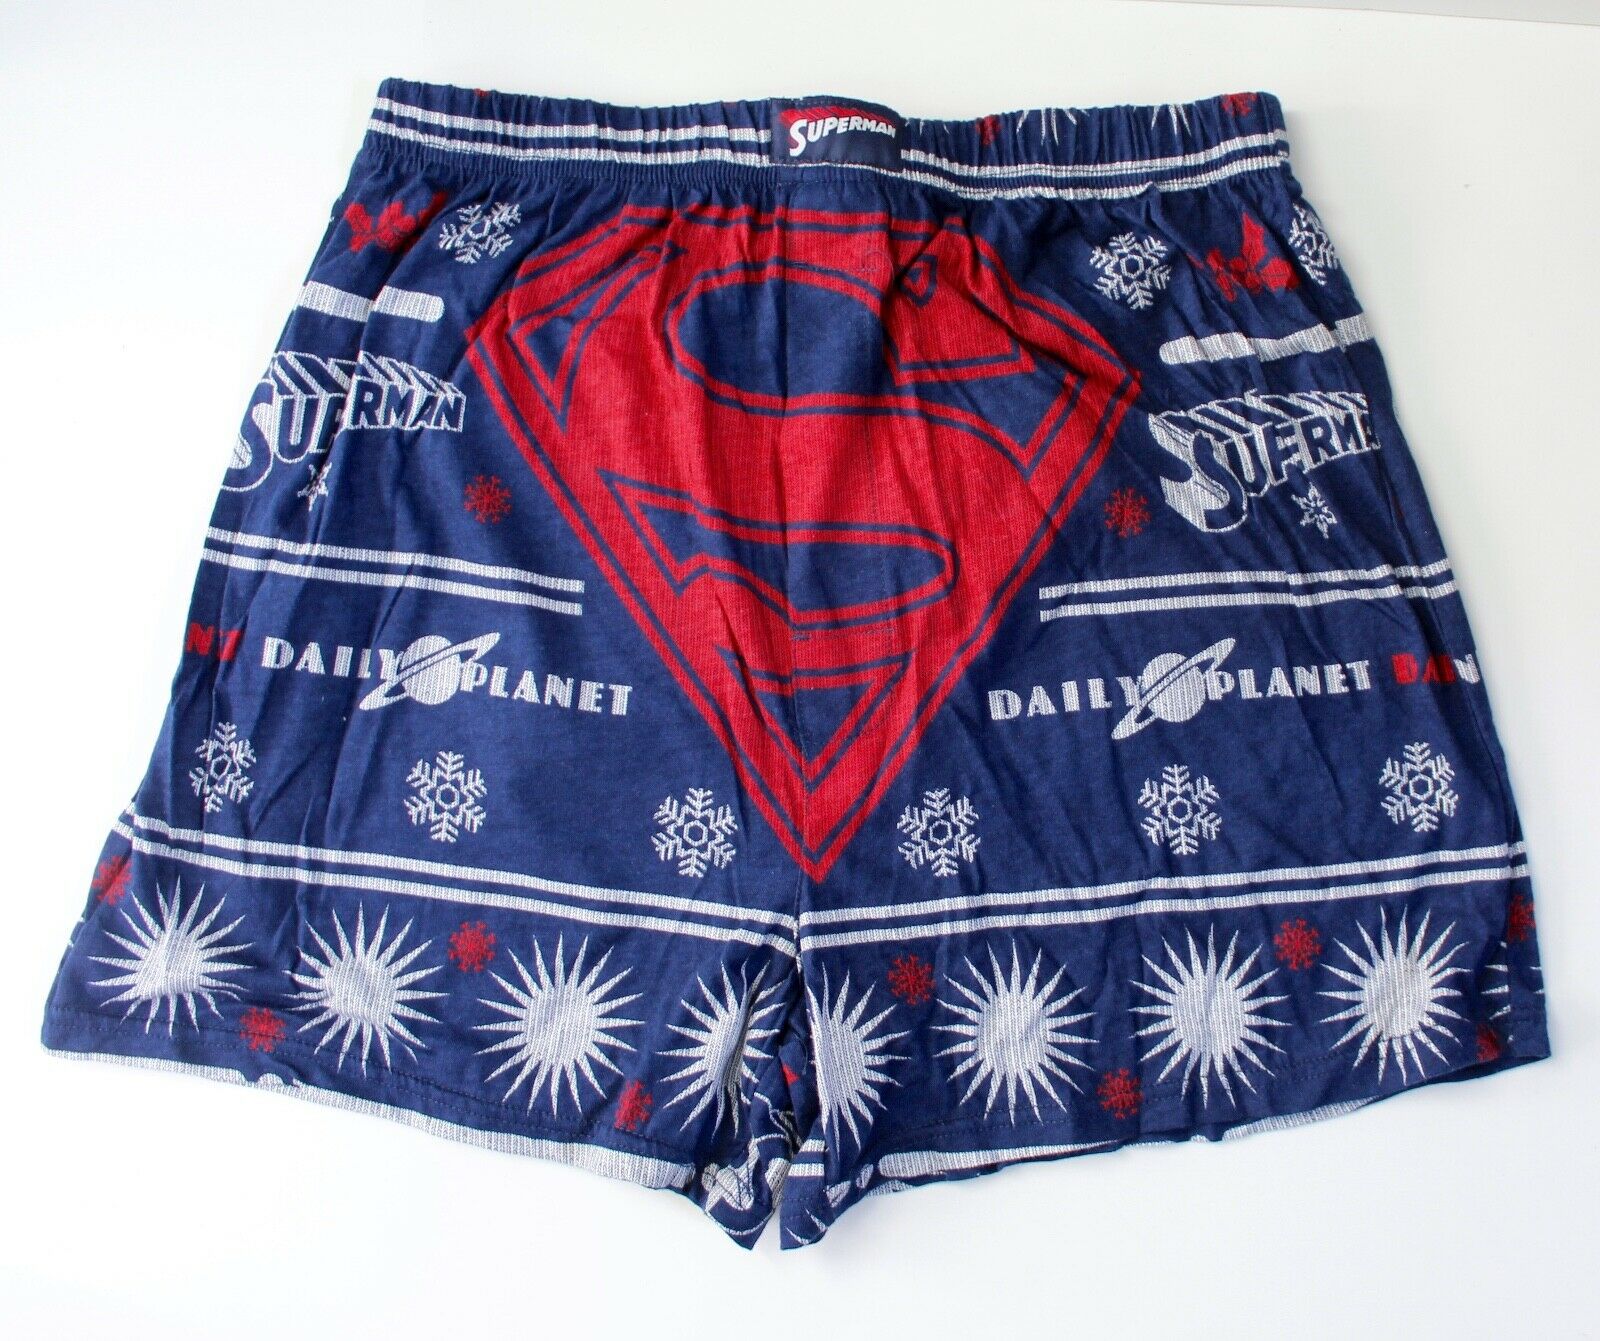 2885.Superman “Daily Planet” Boxers with Gift Bag